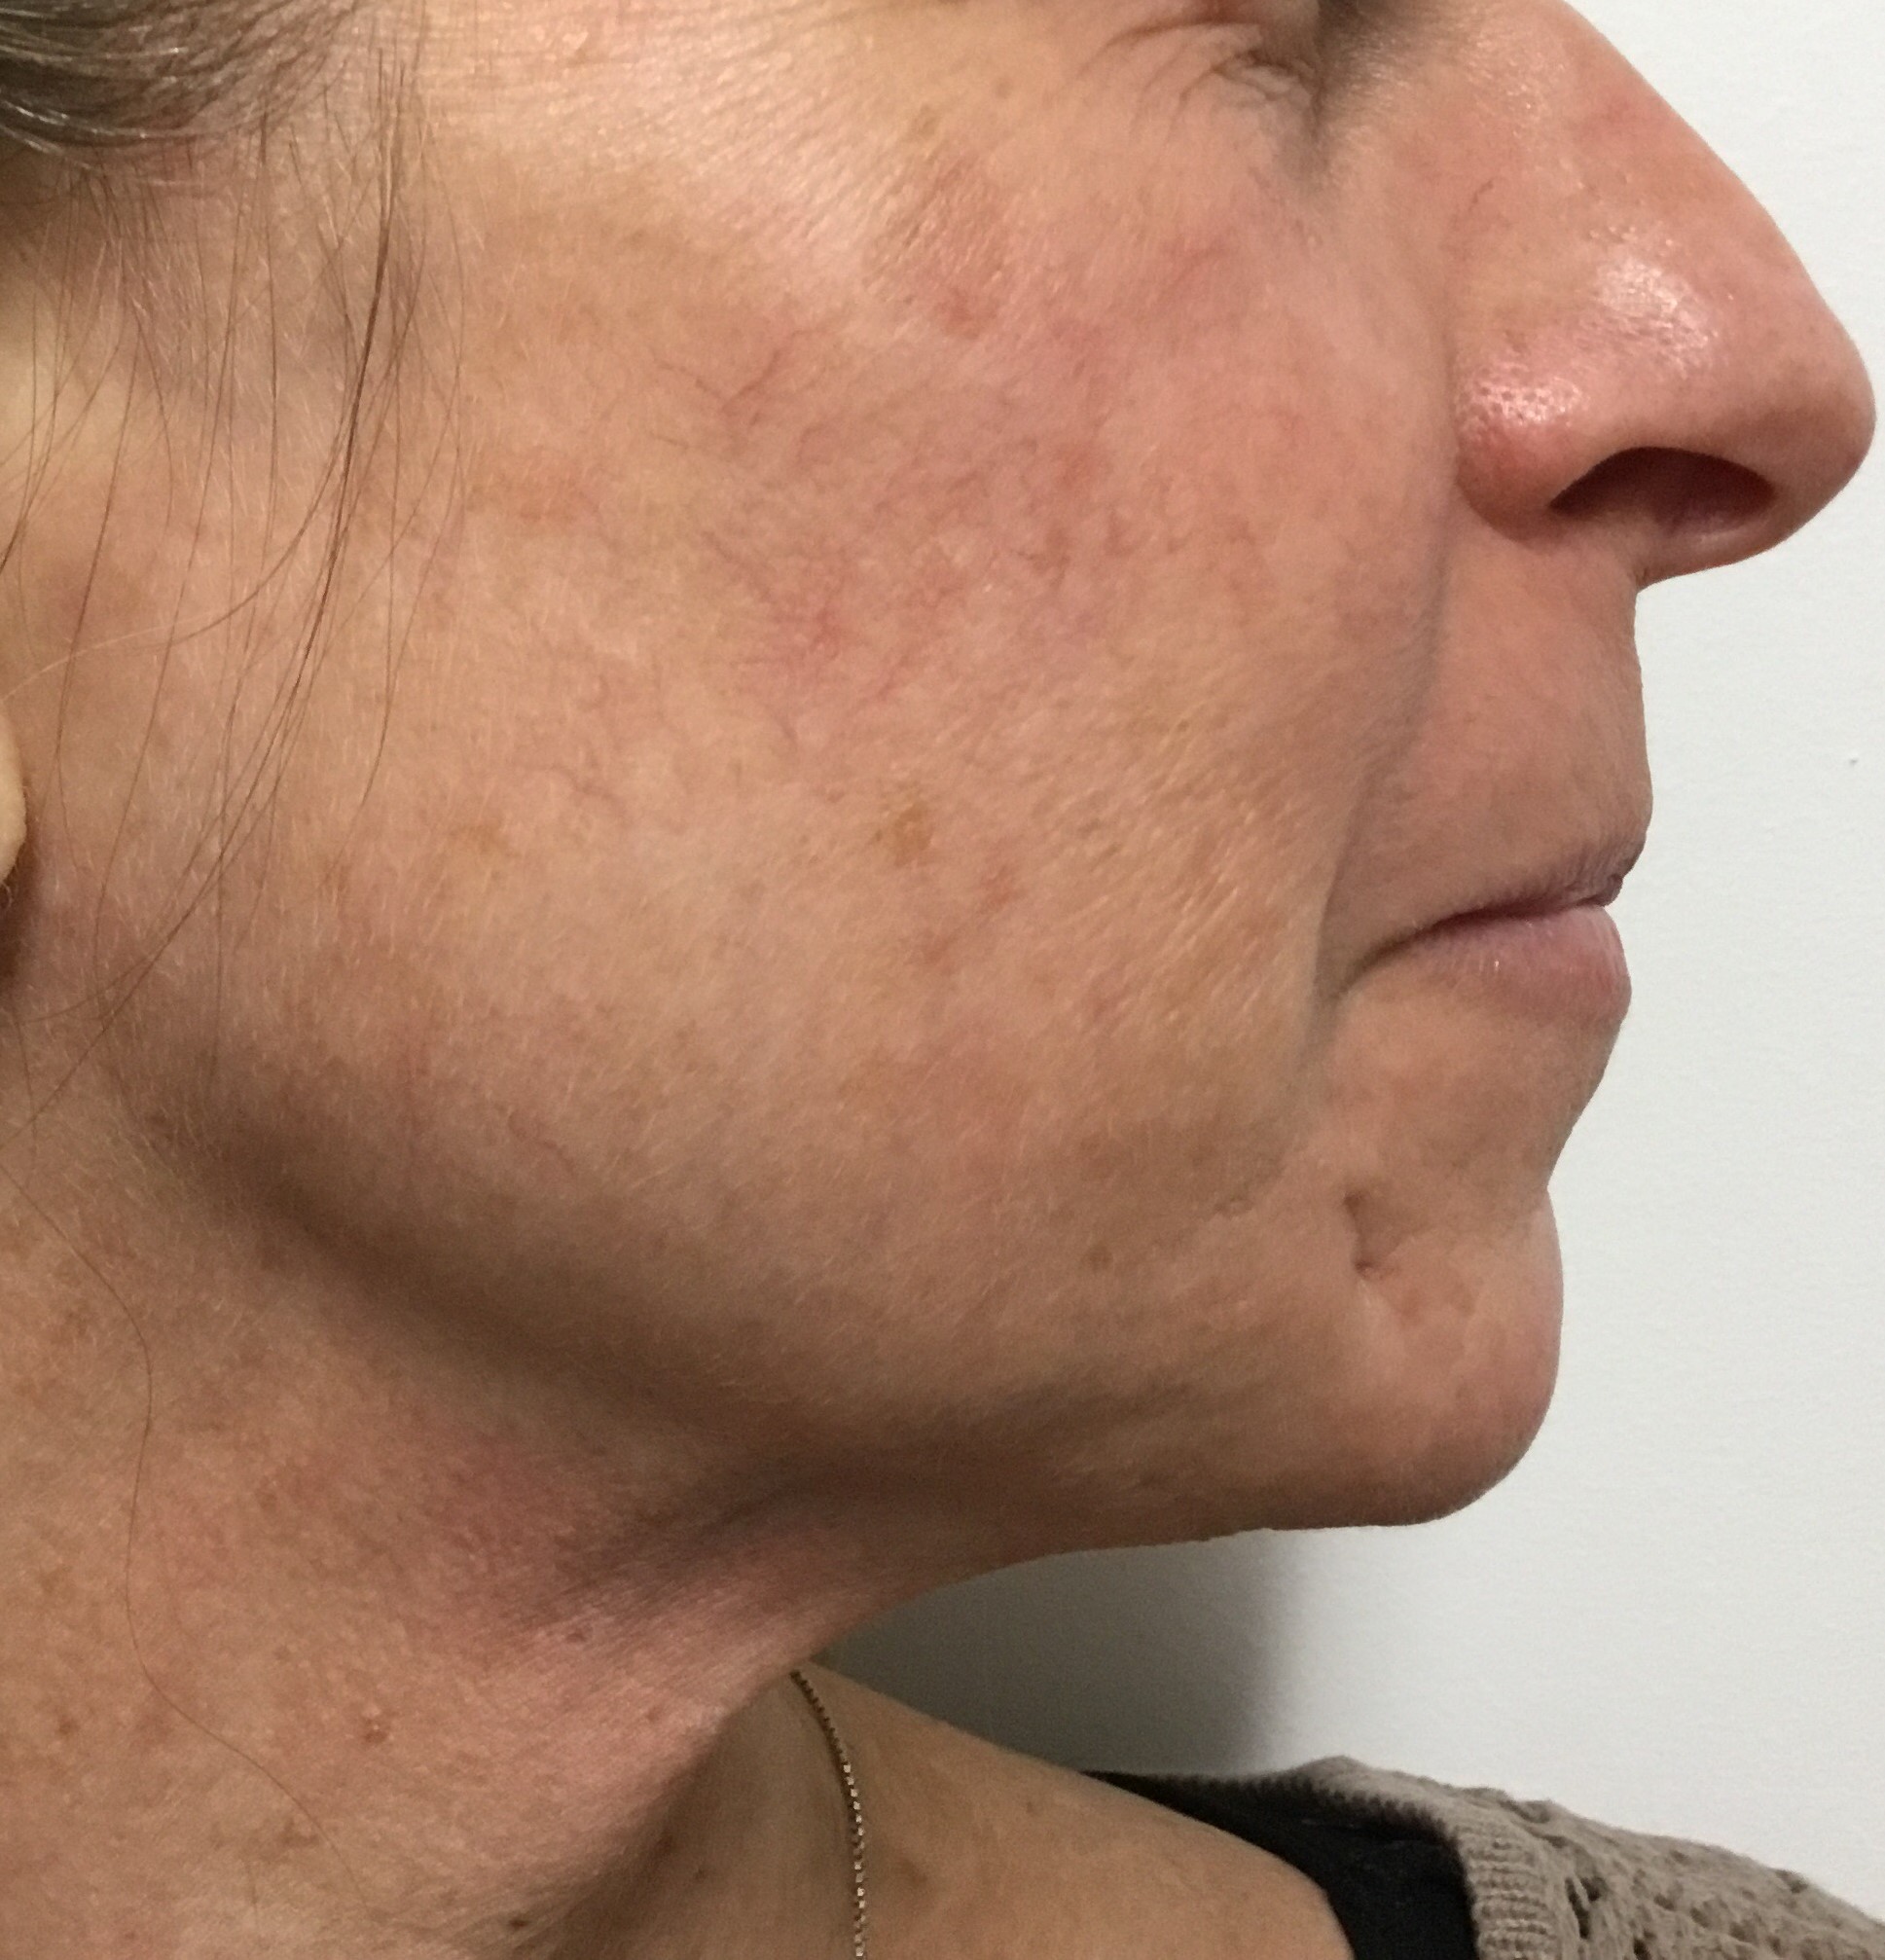 After: 1 VBeam treatment (normally needs 2-3 treatments) 